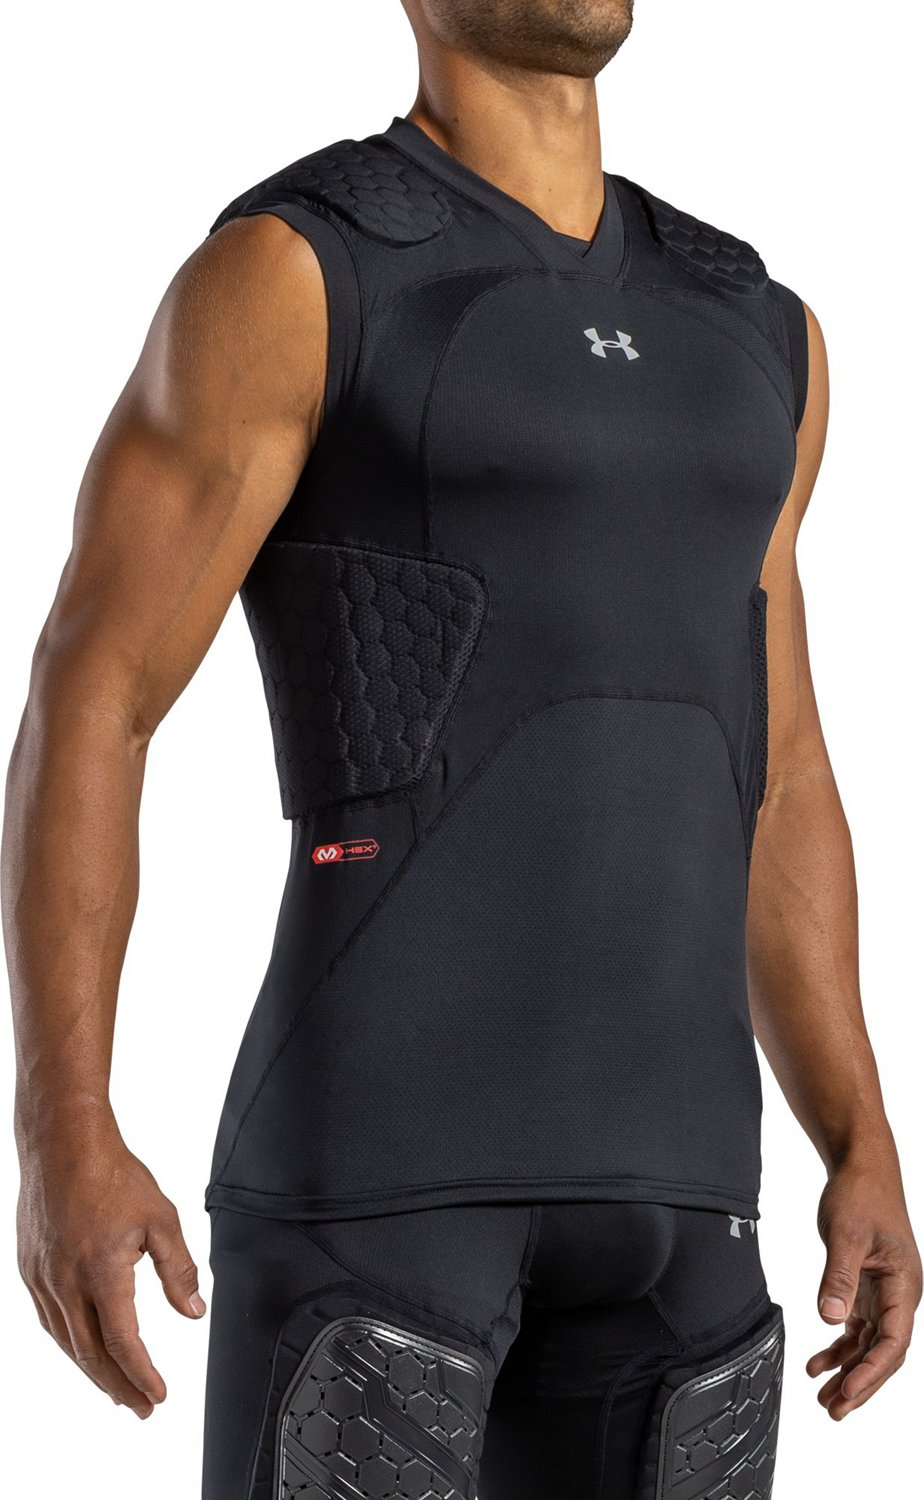 Under Armour Adults Gameday Armour Pro 5-Pad Top Base Layer